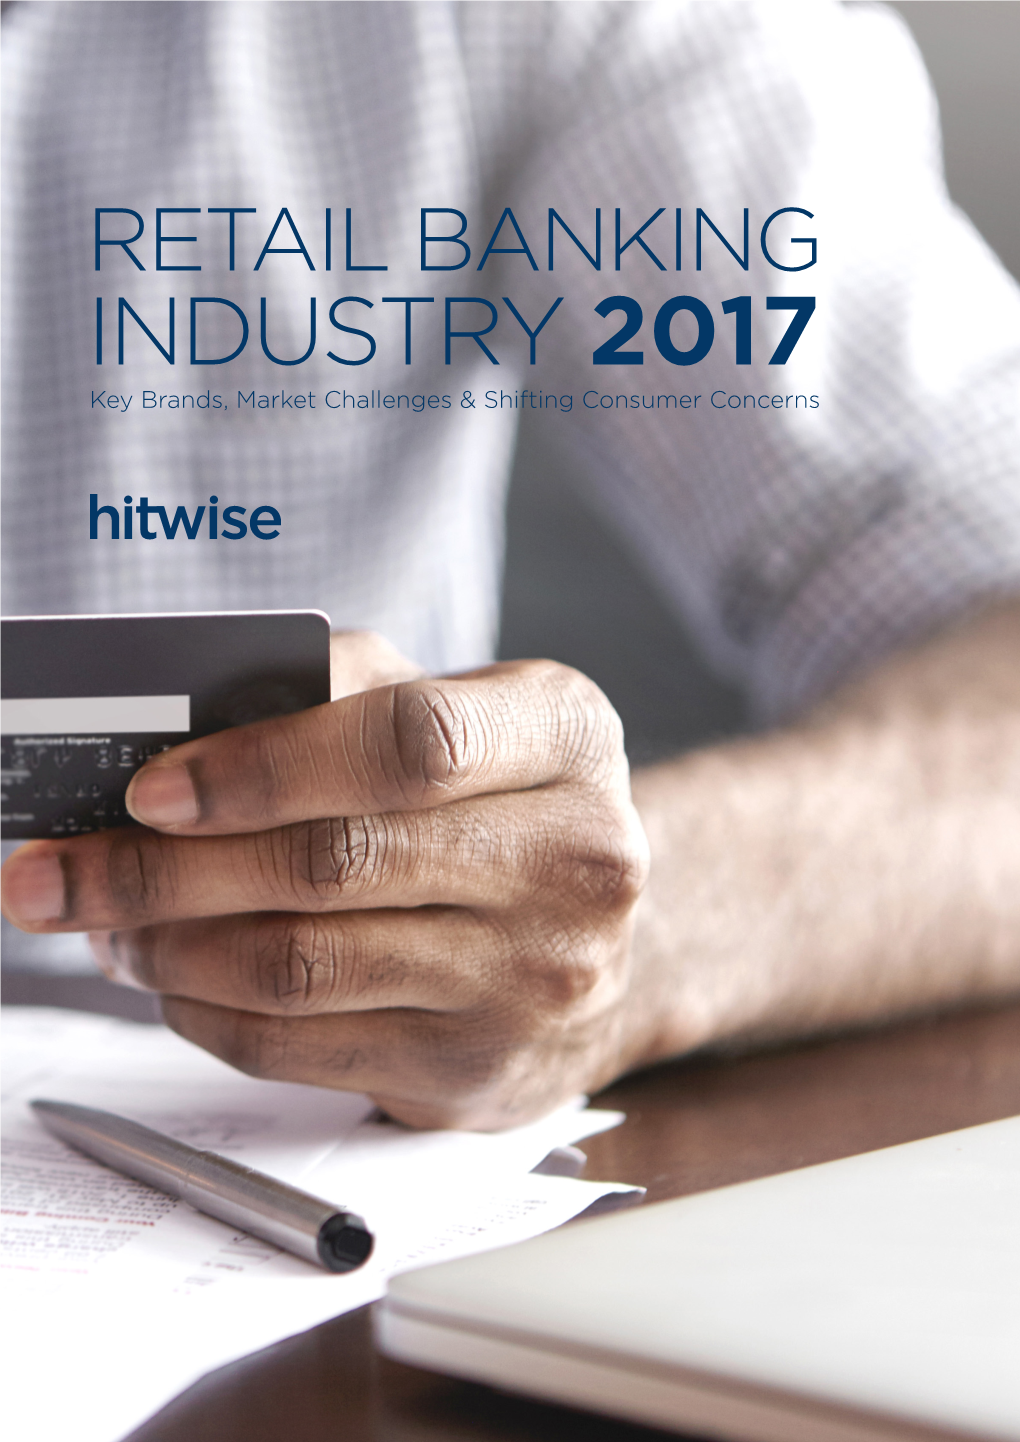 INDUSTRY 2017 Key Brands, Market Challenges & Shifting Consumer Concerns Introduction